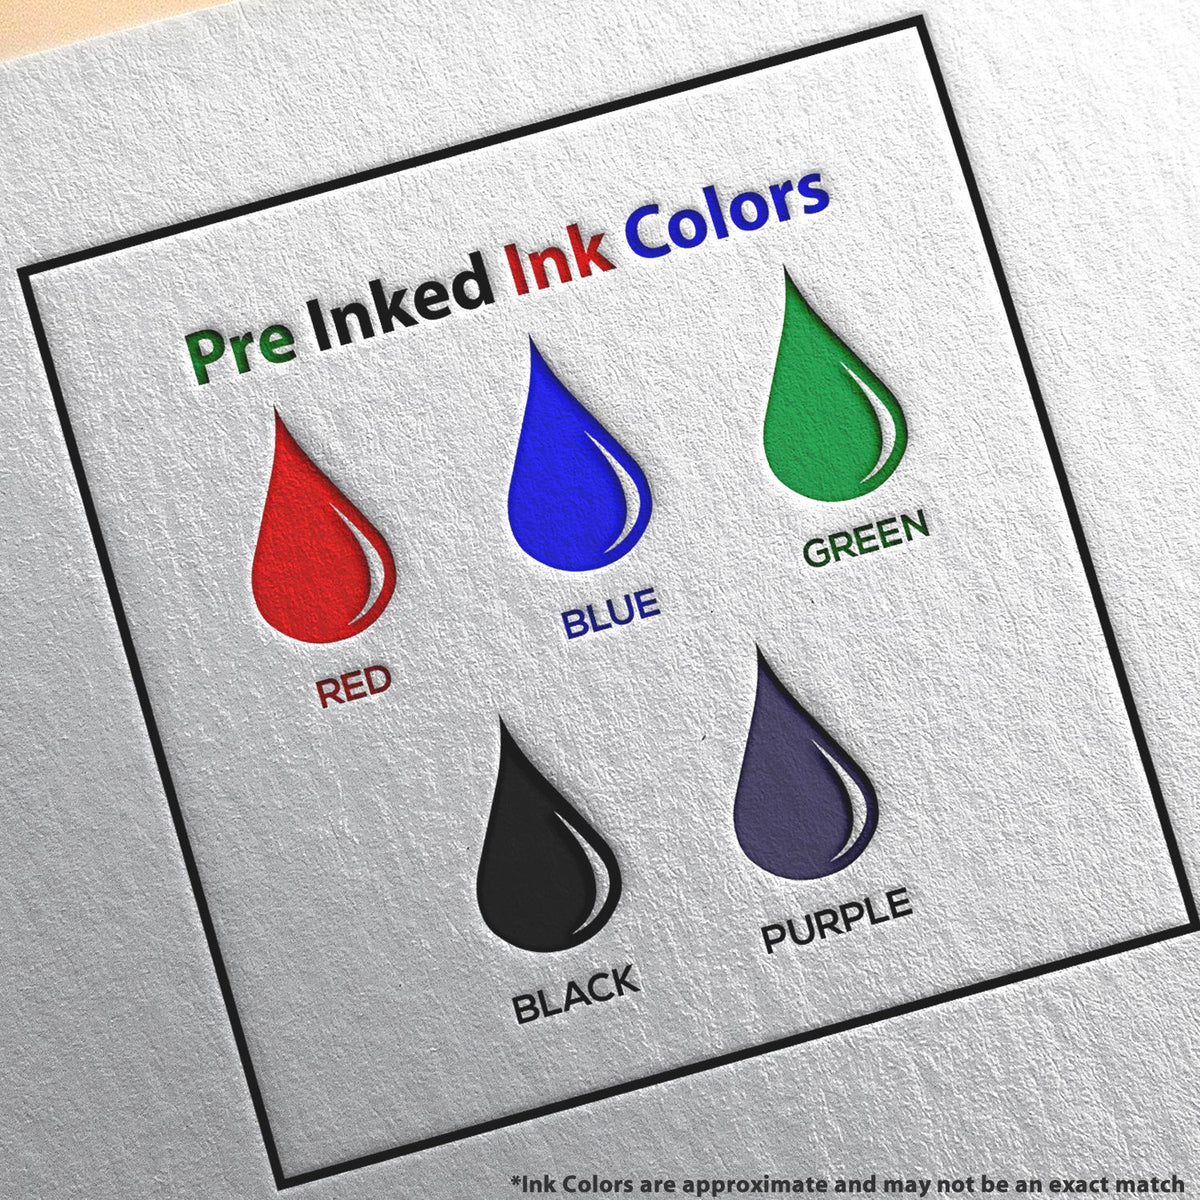 A picture showing the different ink colors or hues available for the Premium MaxLight Pre-Inked Oklahoma Engineering Stamp product.